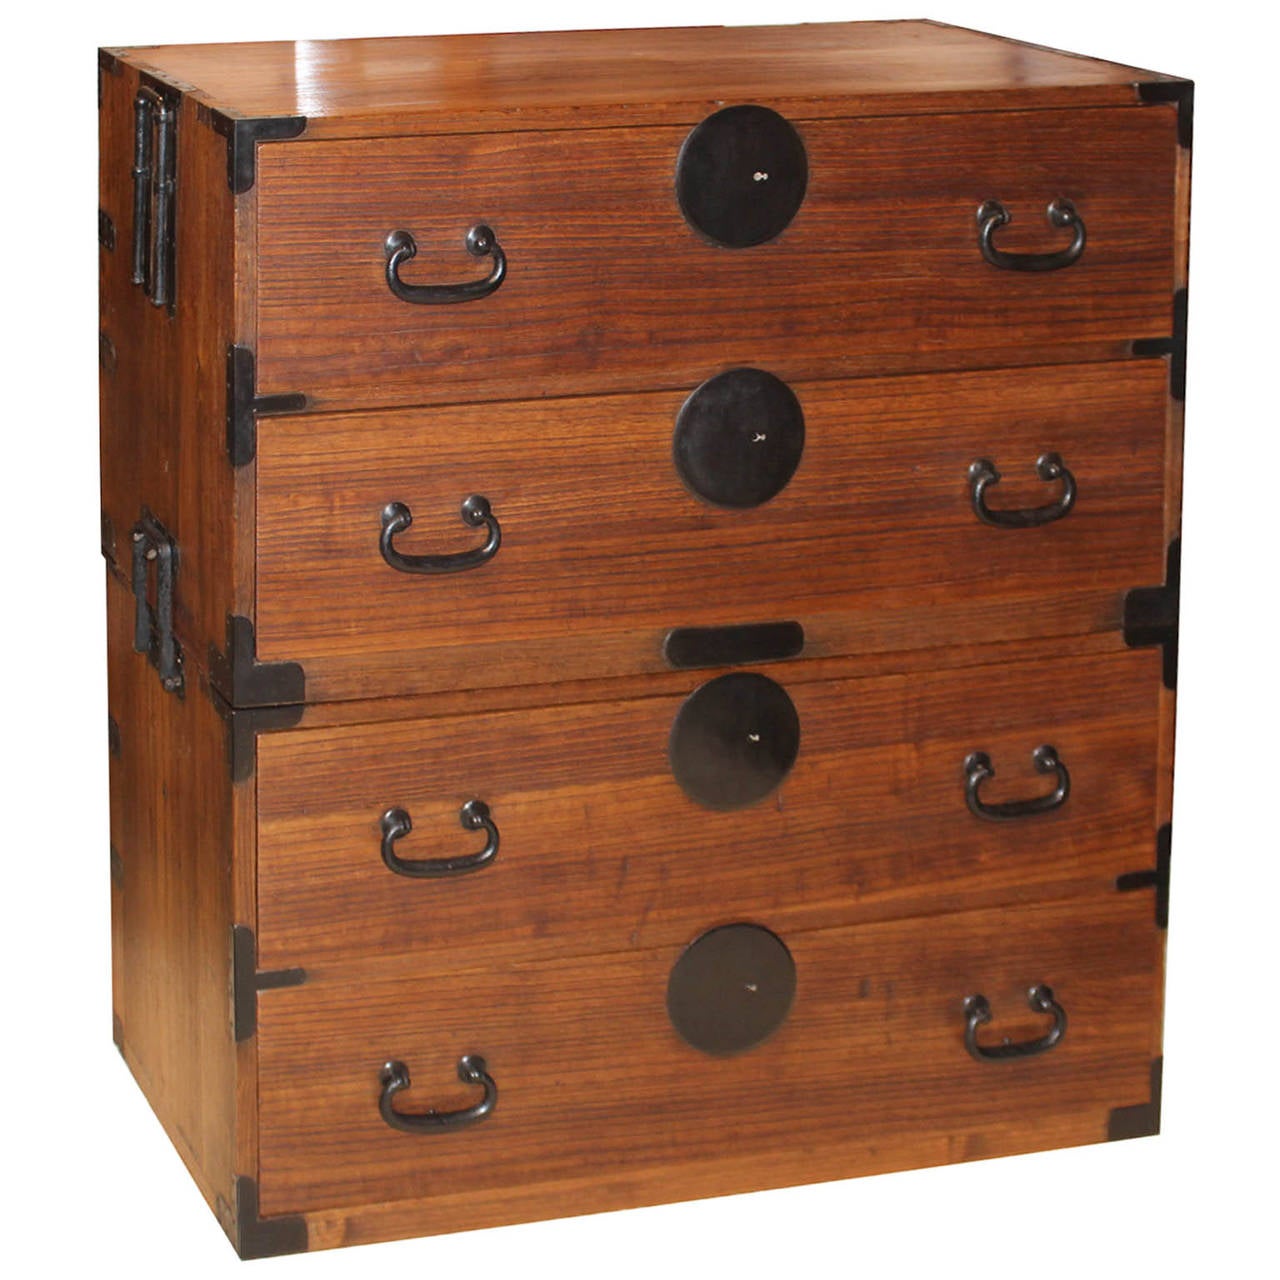 Meiji period, circa 1850s two section chest originally used for clothing storage. All original hand-forged iron hardware with simple round lock plates. Solid kiri wood (paulownia).